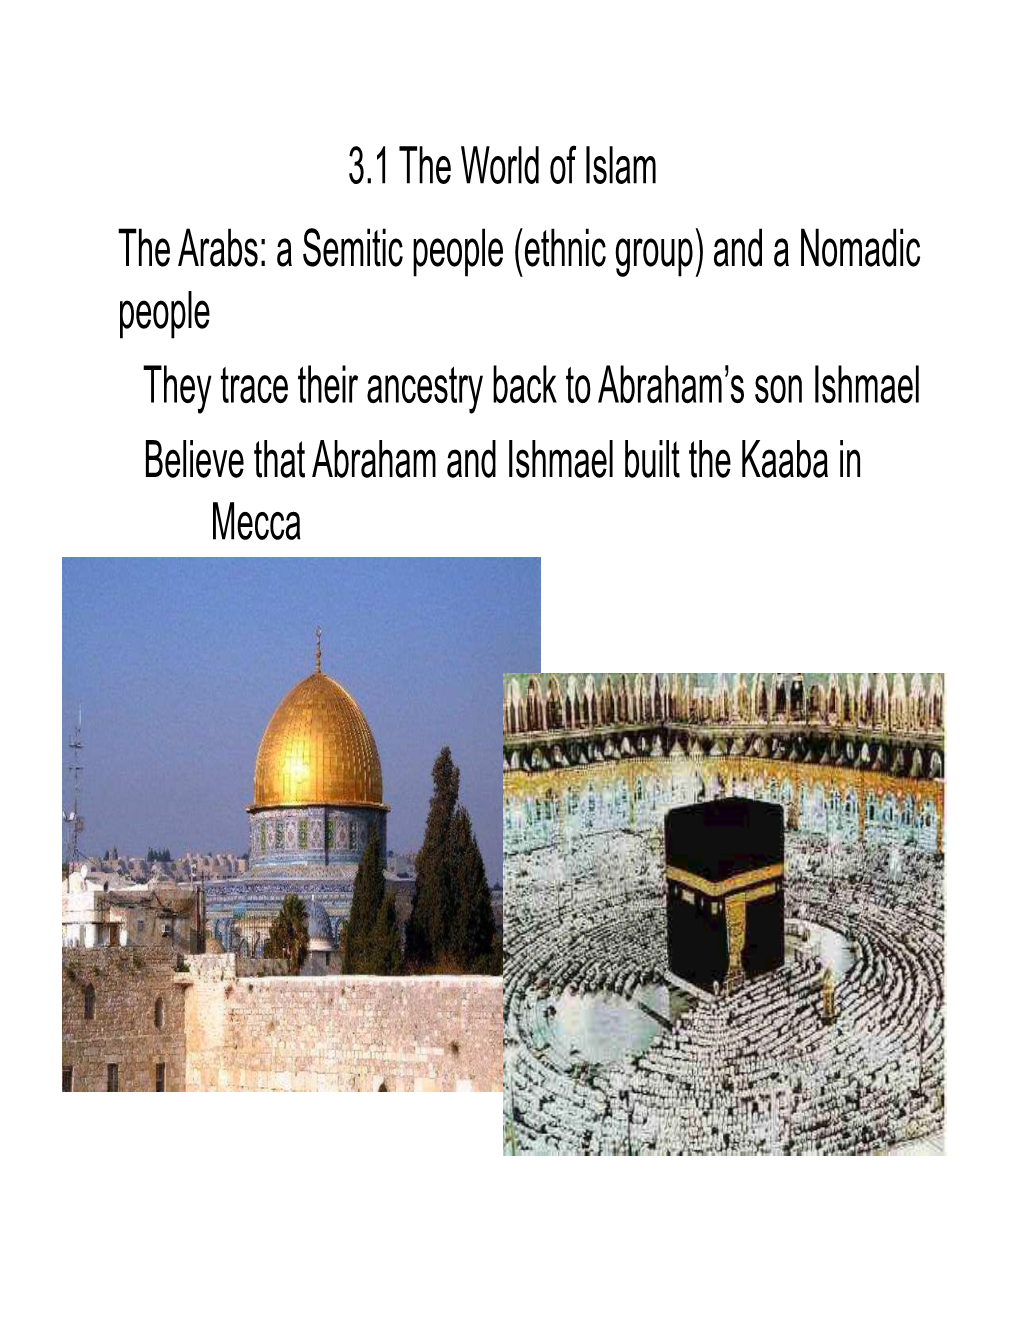 3.1 the World of Islam the Arabs: a Semitic People